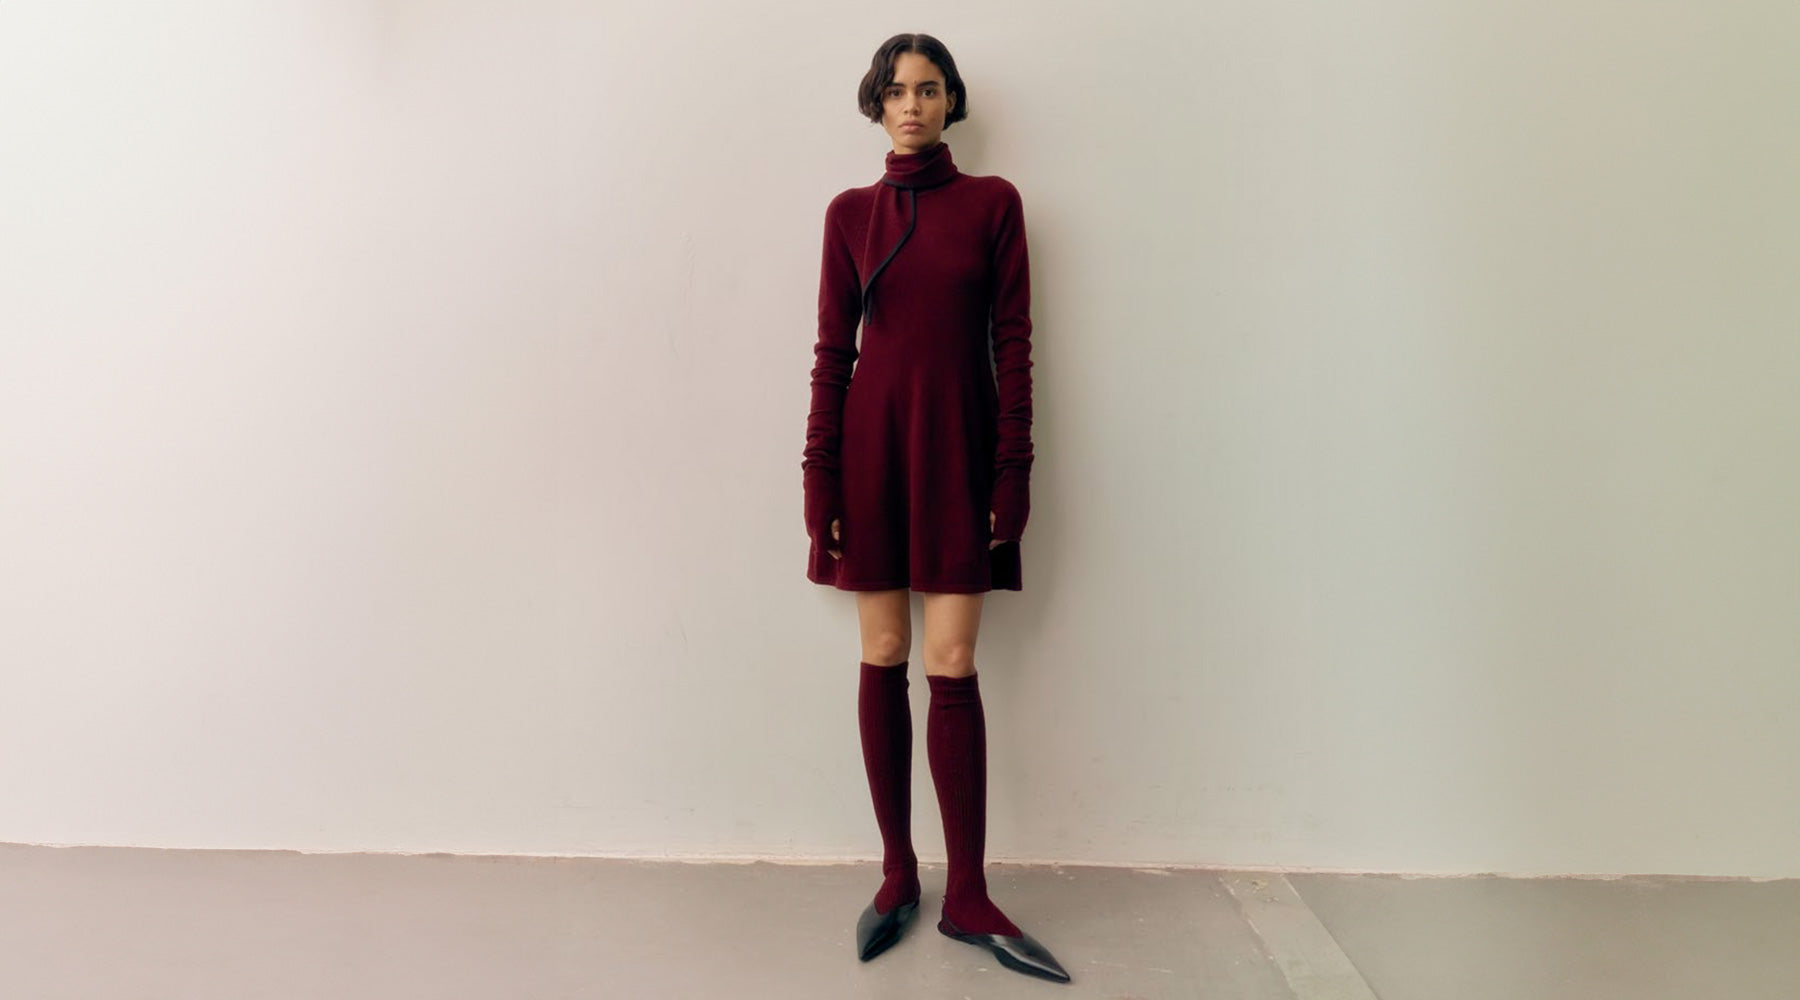 Winter Dress Outfits: How to Wear a Dress in Winter